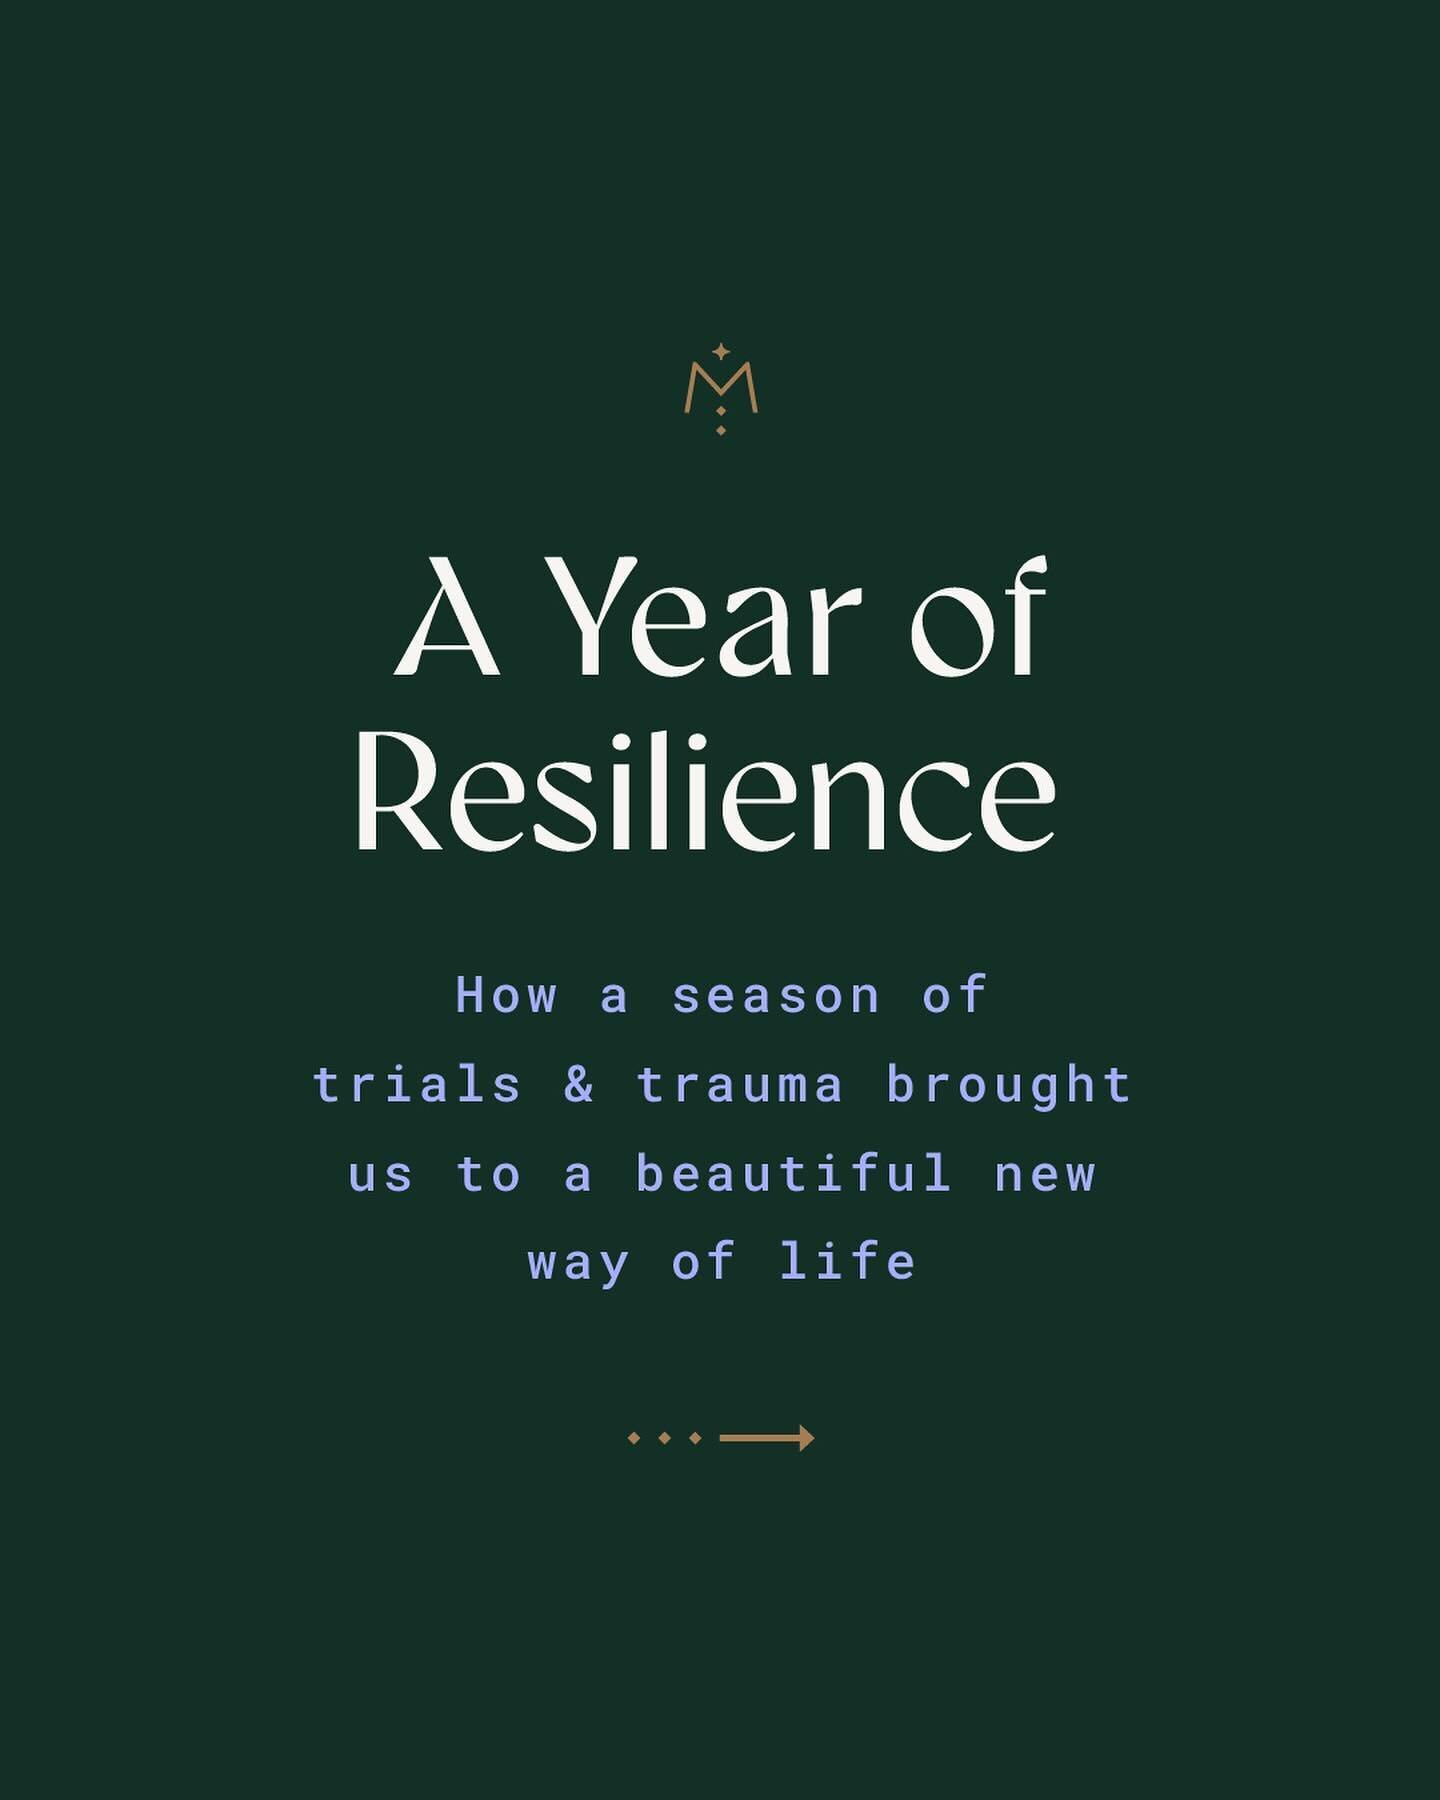 Through trials, trauma, and &mdash; eventually &mdash; triumph&hellip; 

We&rsquo;re somehow still standing.

I&rsquo;ve been a ghost here for almost 2 years, navigating the most difficult and bittersweet season of my life so far. It&rsquo;s been a V